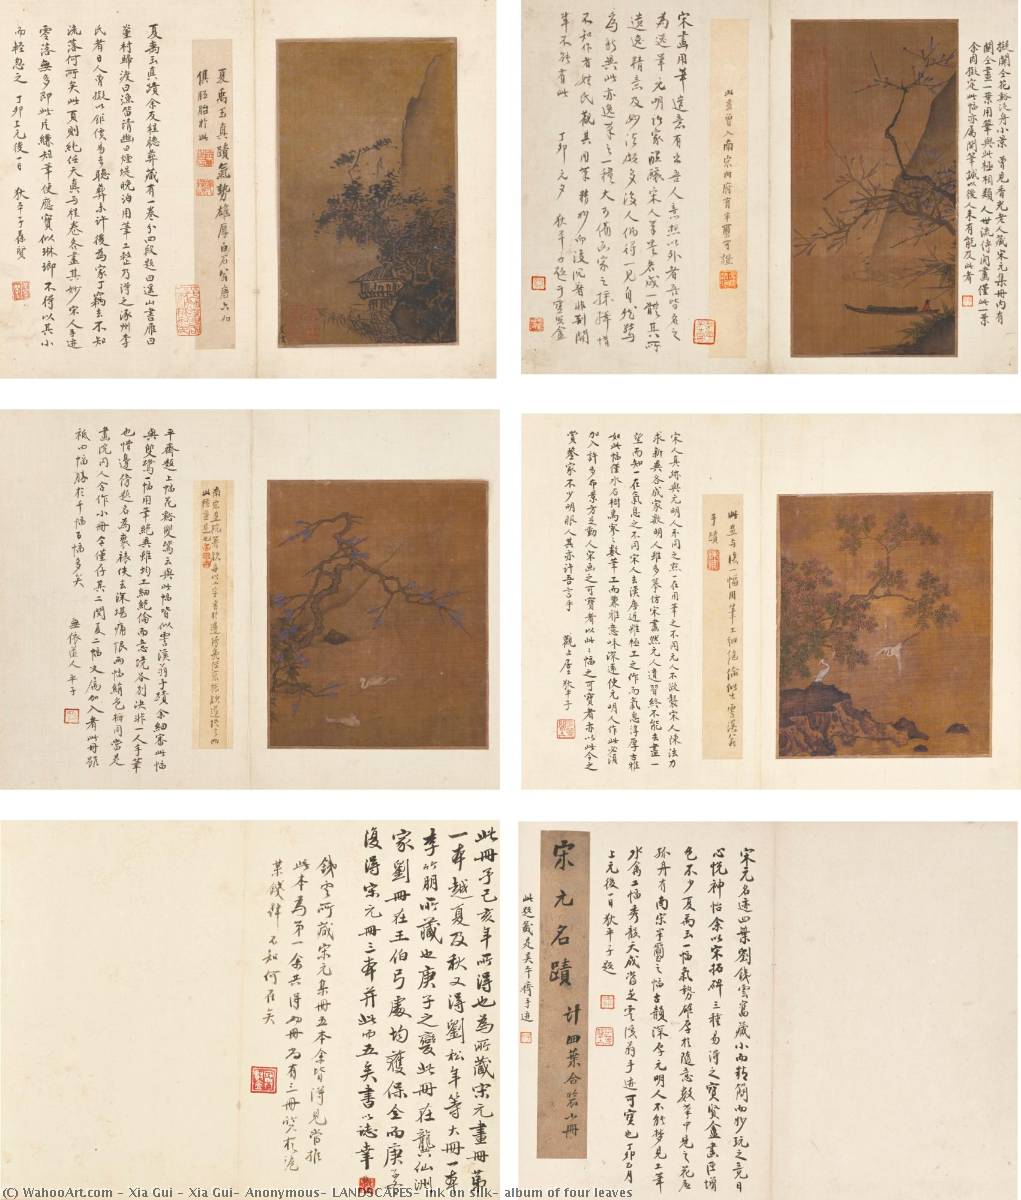 WikiOO.org - Encyclopedia of Fine Arts - Lukisan, Artwork Xia Gui - Xia Gui, Anonymous, LANDSCAPES, ink on silk, album of four leaves